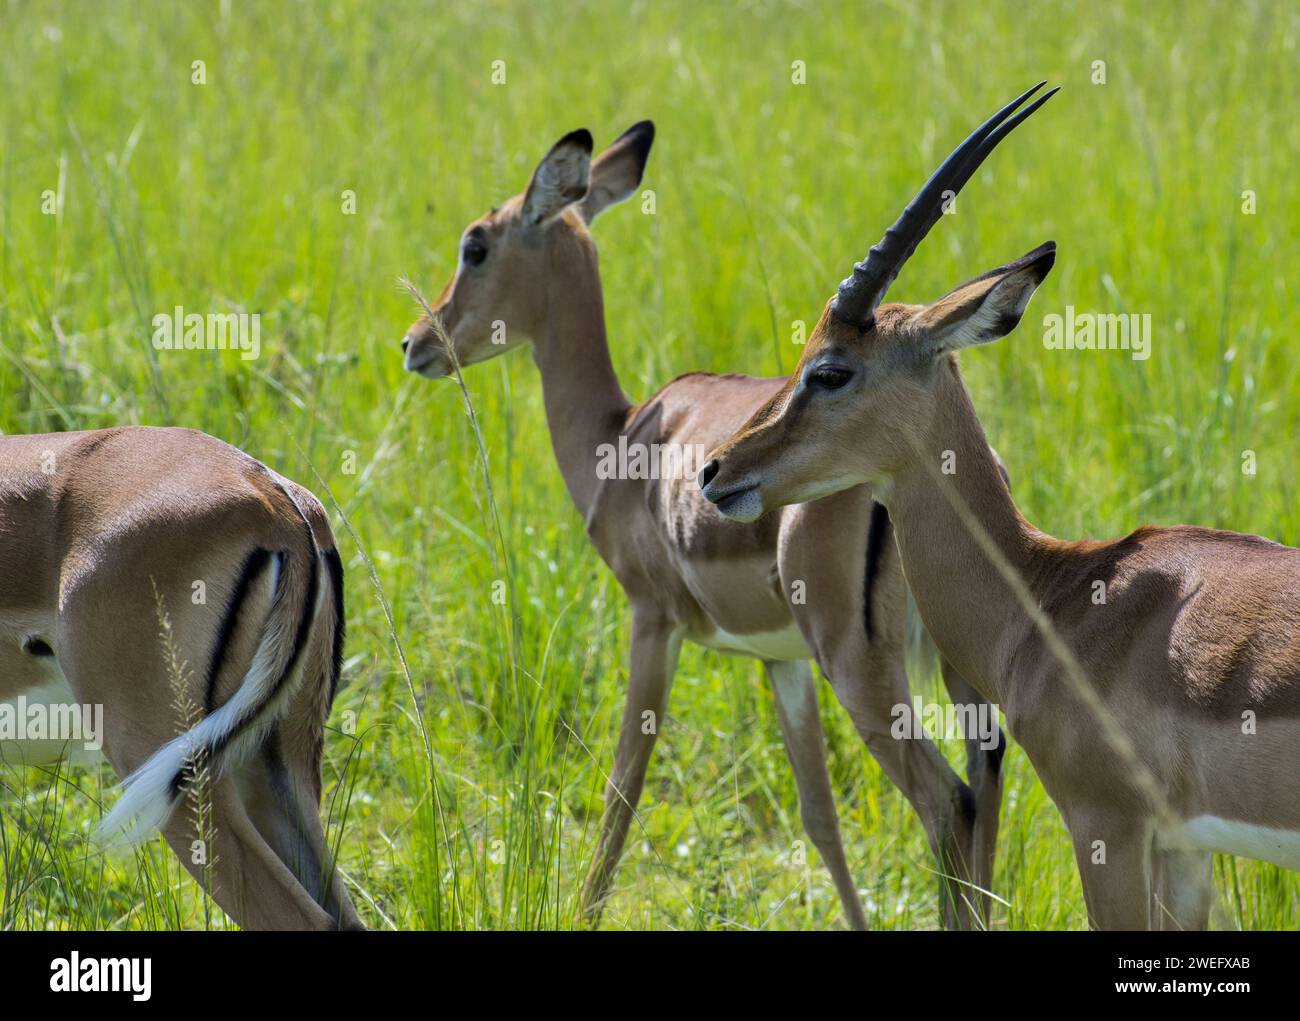 Impalas photographed on safari in Akagera National Park in Northeastern Rwanda, Central Africa’s largest protected wetland. Africa Parks Stock Photo